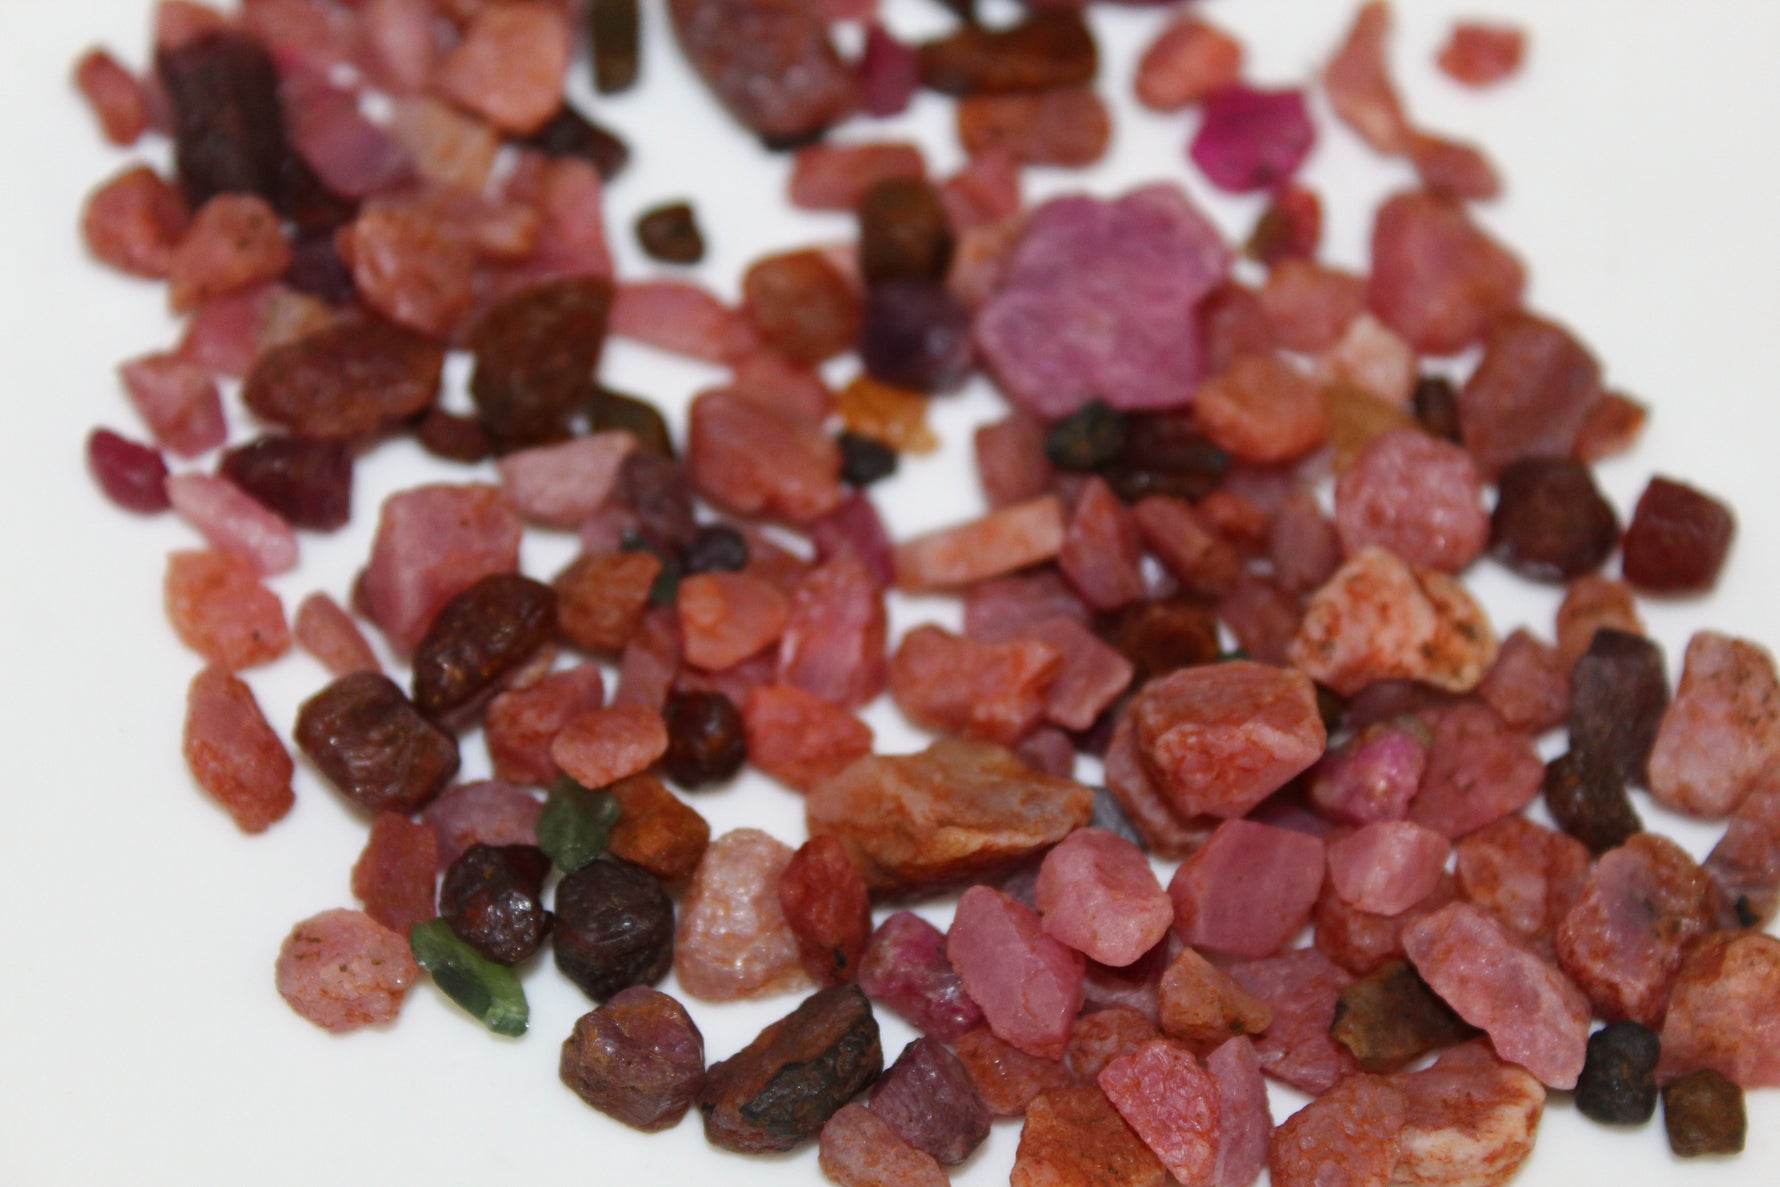 1000 Grams Natural Raw Ruby Stone for cabbing / beading, wirewrapping |  Lapidary Rough Ruby Stones